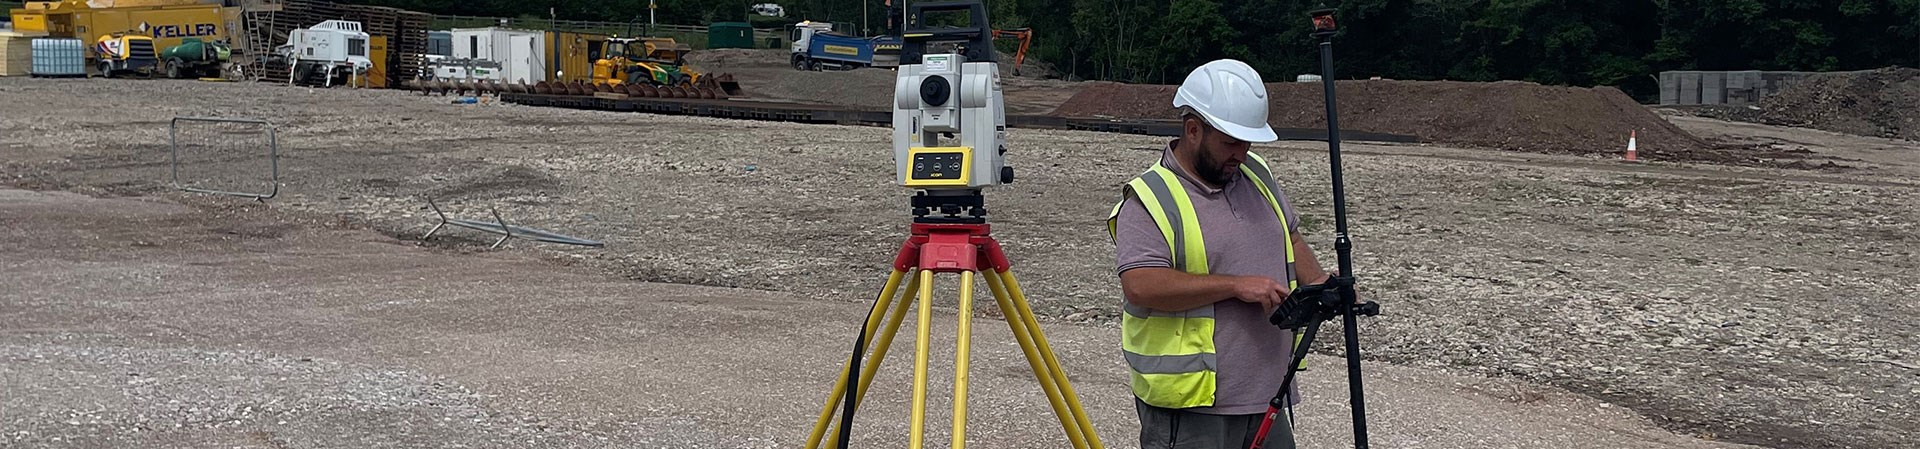 Robotic Total Station Onsite At Coed Drew Housing Development Being Used By A Surveyor Standing Next To It